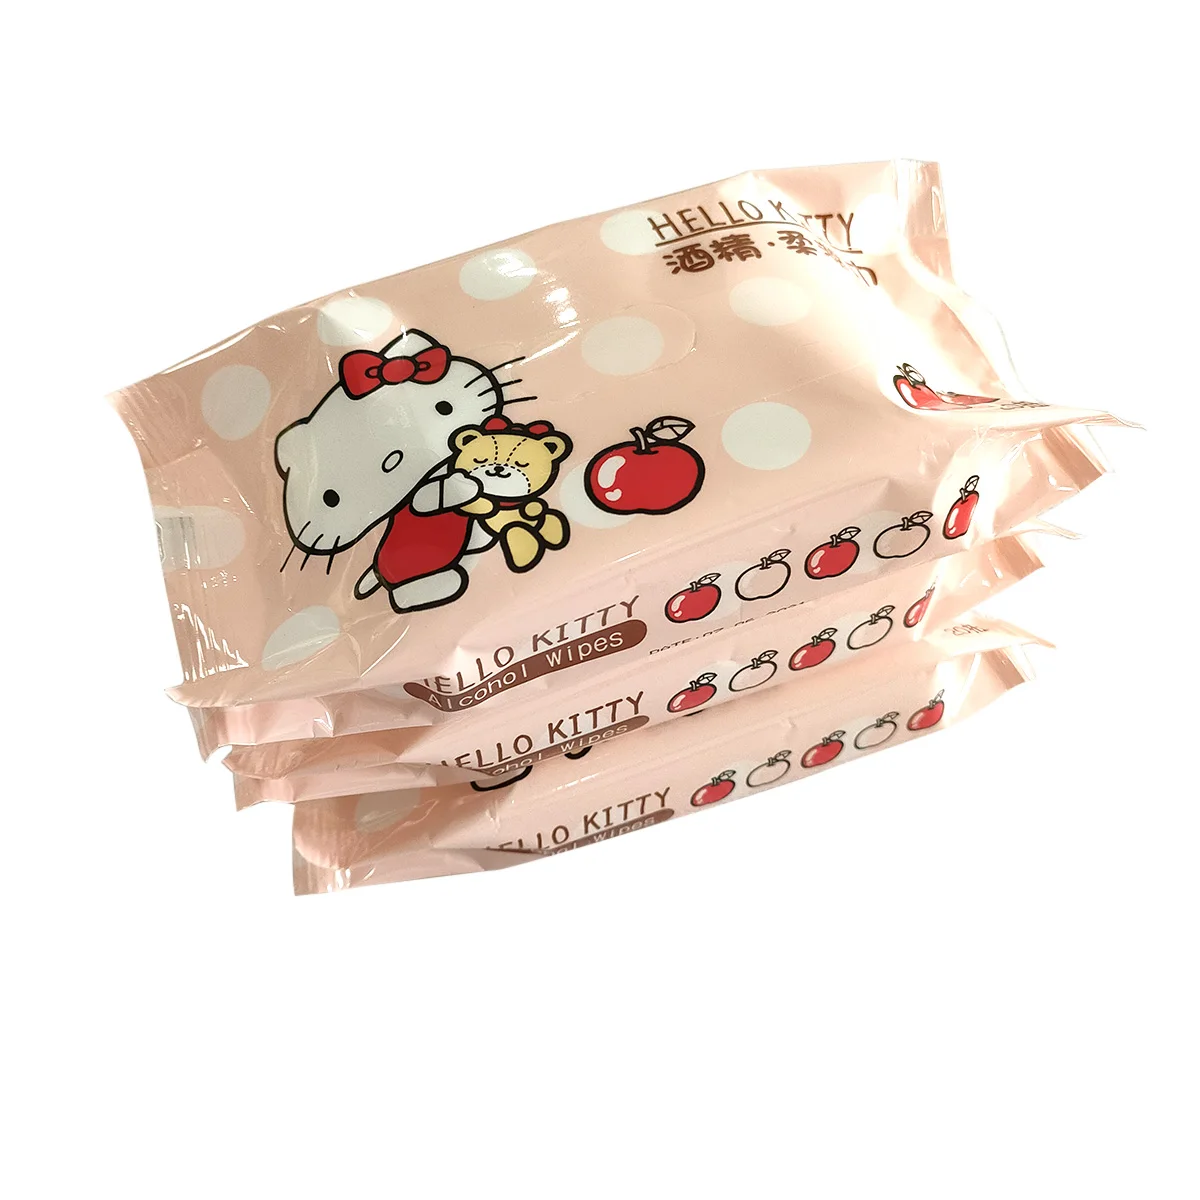 Mini Pocket Cleaning Wet Wipe Napkin Tissue Towel Bacteria Degradable Cute Canister Wet Wipes